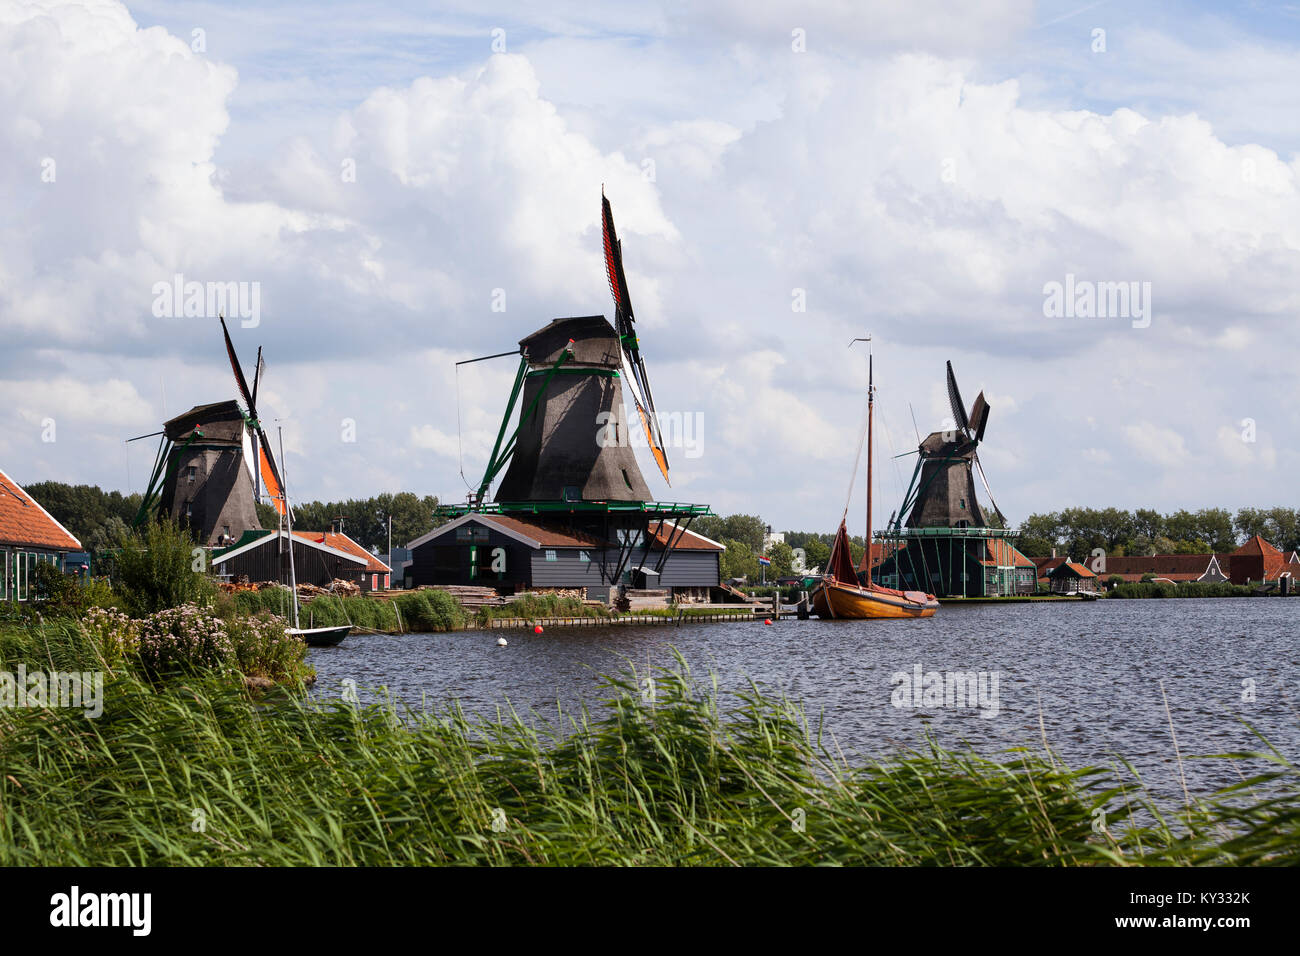 Zaanse Schans. Historical town in North Holland with open-air museum. Working windmills, Stock Photo